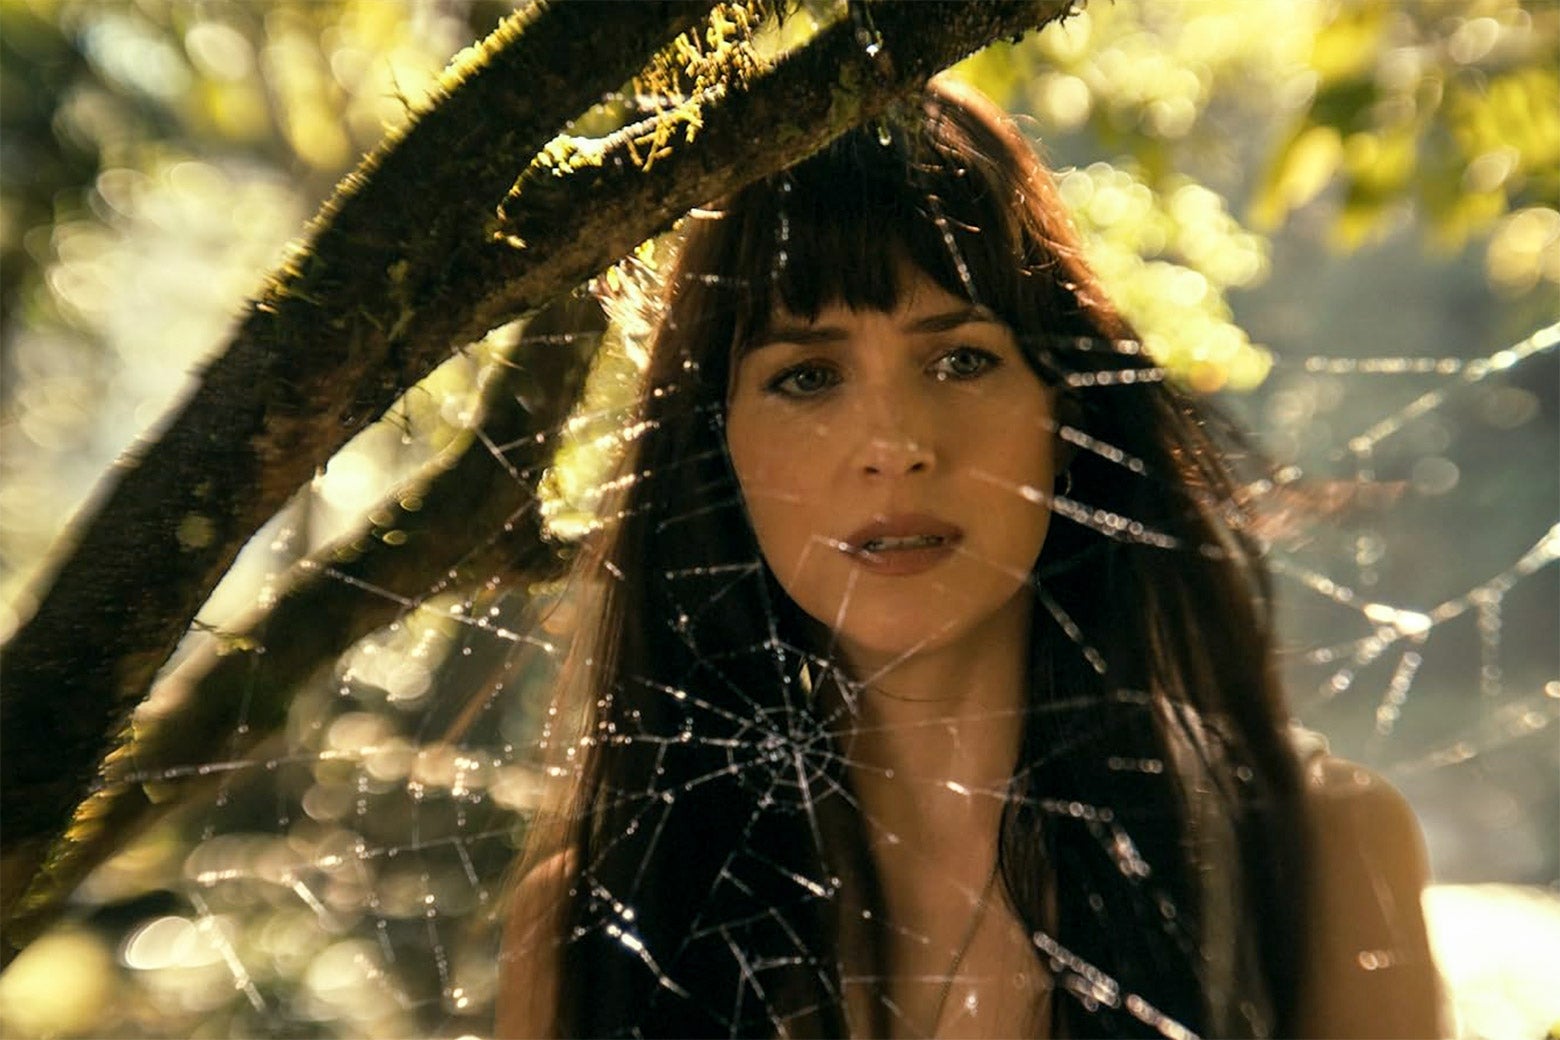 Dakota Johnson stares at a spider-web, looking confused